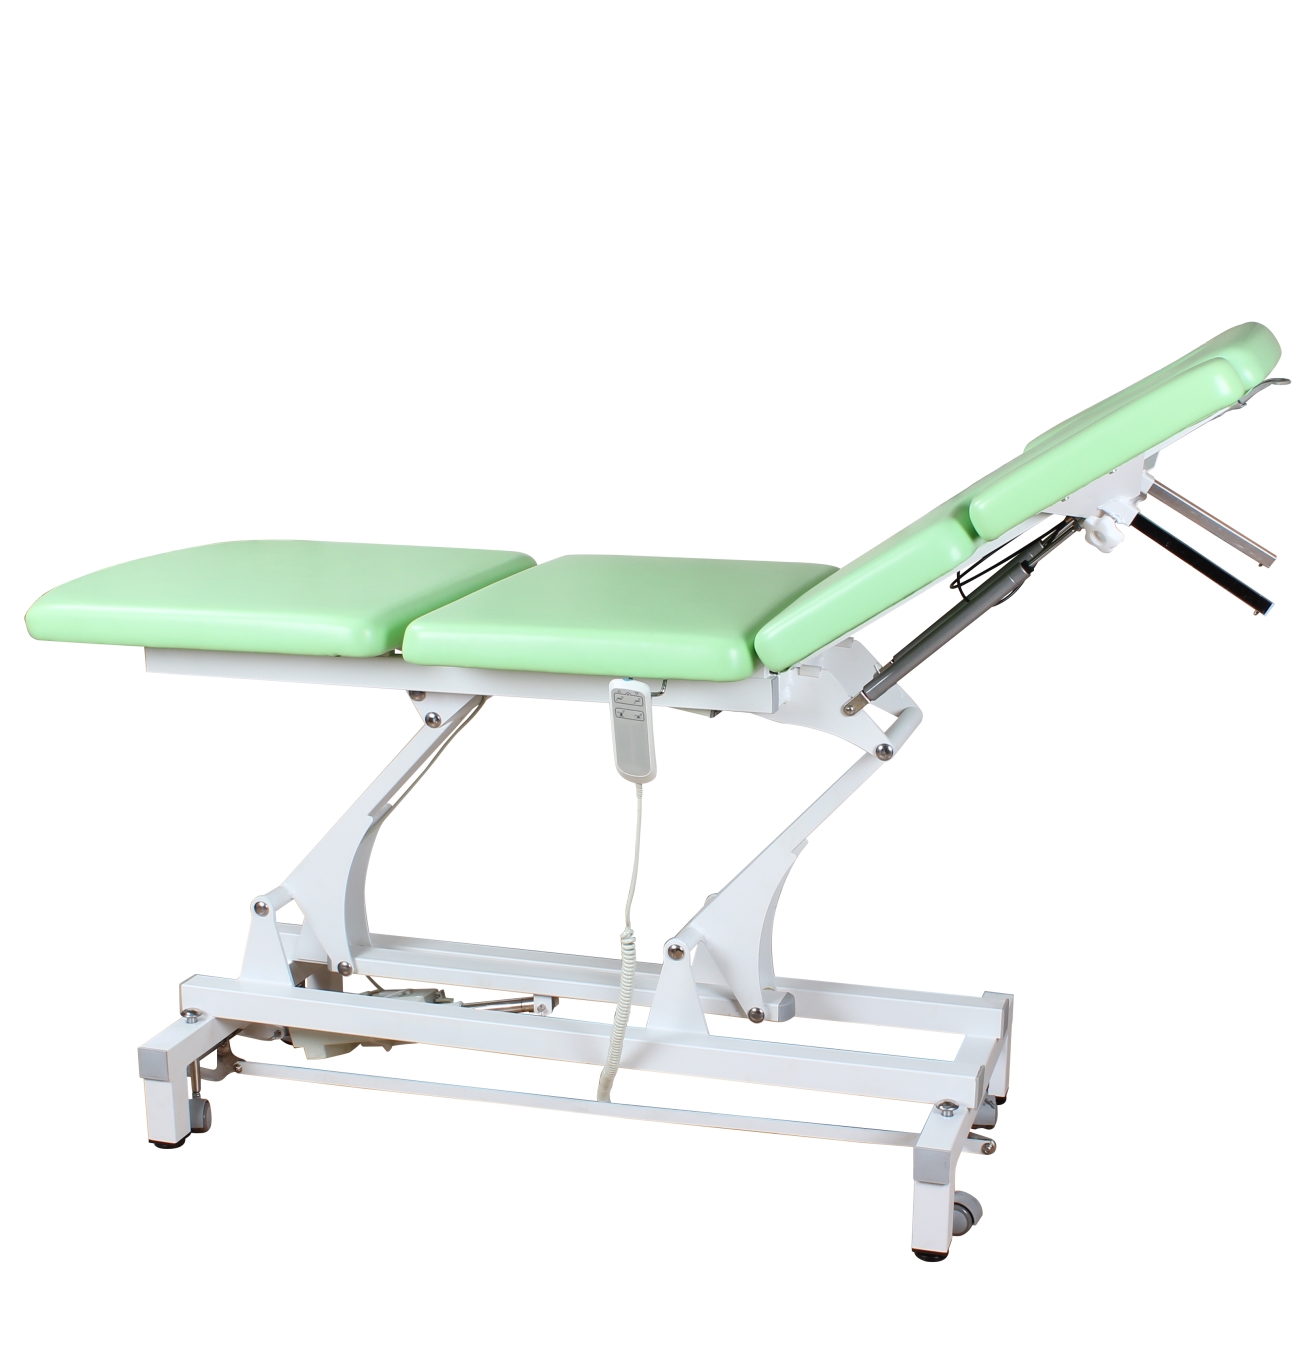 DP-S803 Chiropractic Treatment Examination Table